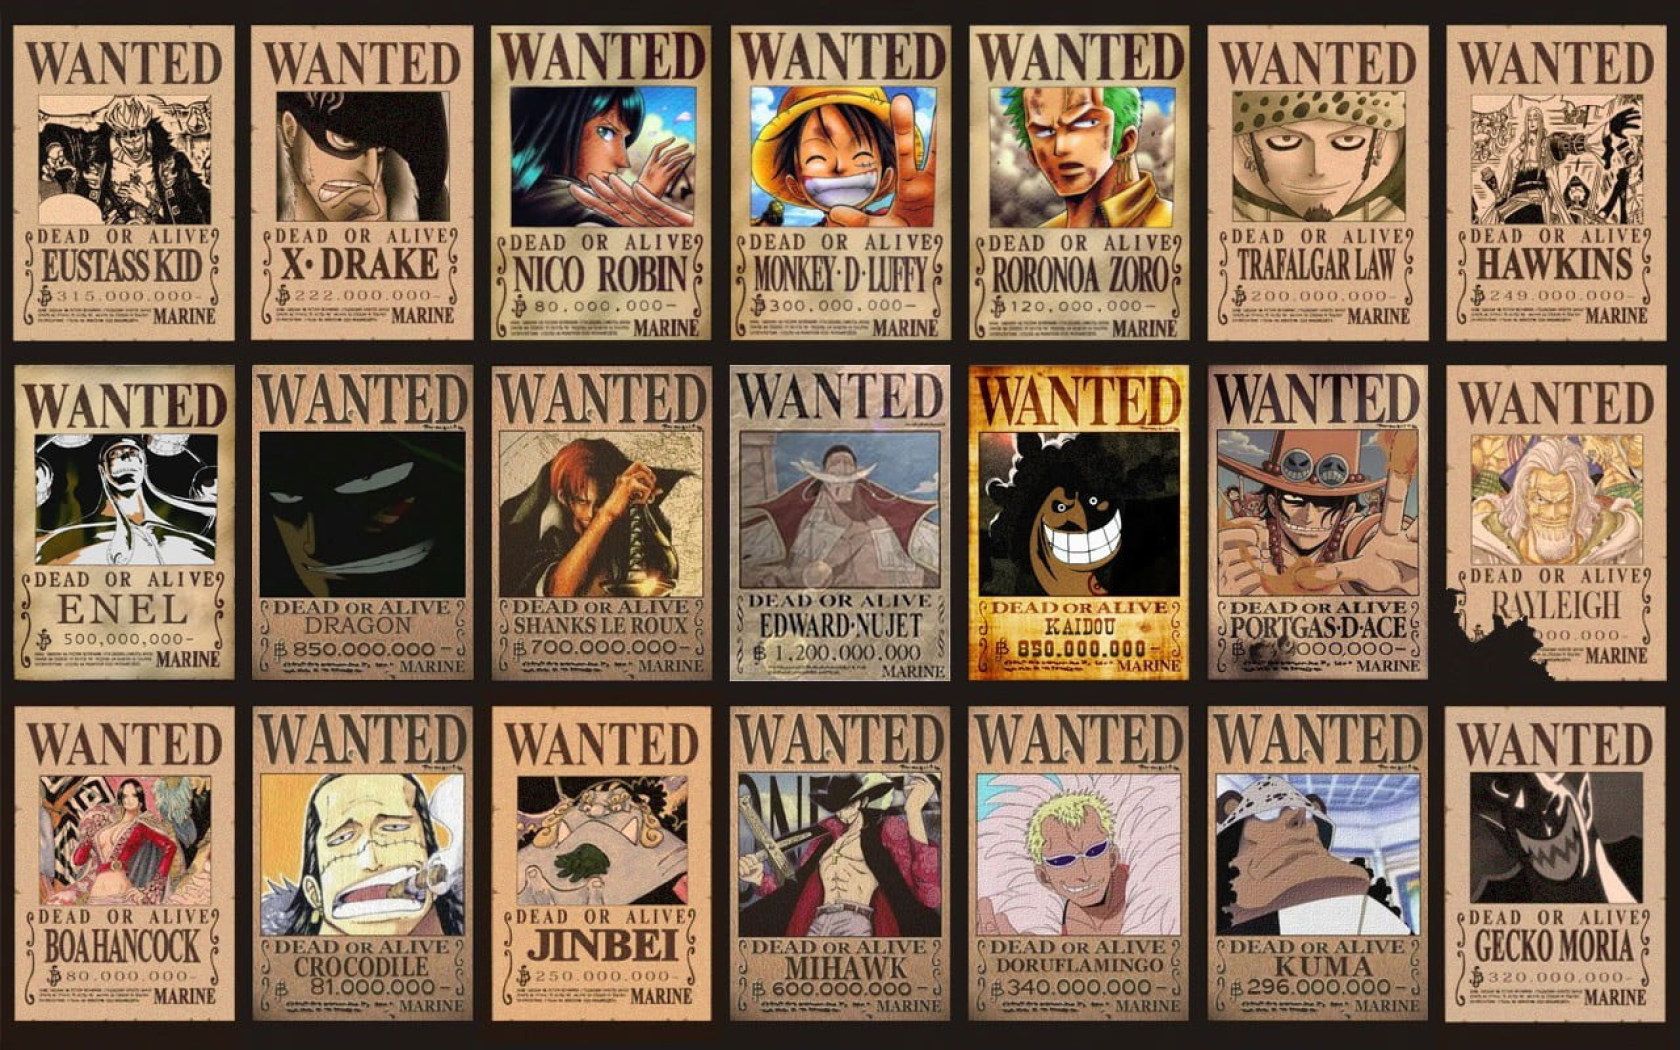 OnePiece wanted list wallpaper, One Piece character wanted poster collage photo • Wallpaper For You HD Wallpaper For Desktop & Mobile